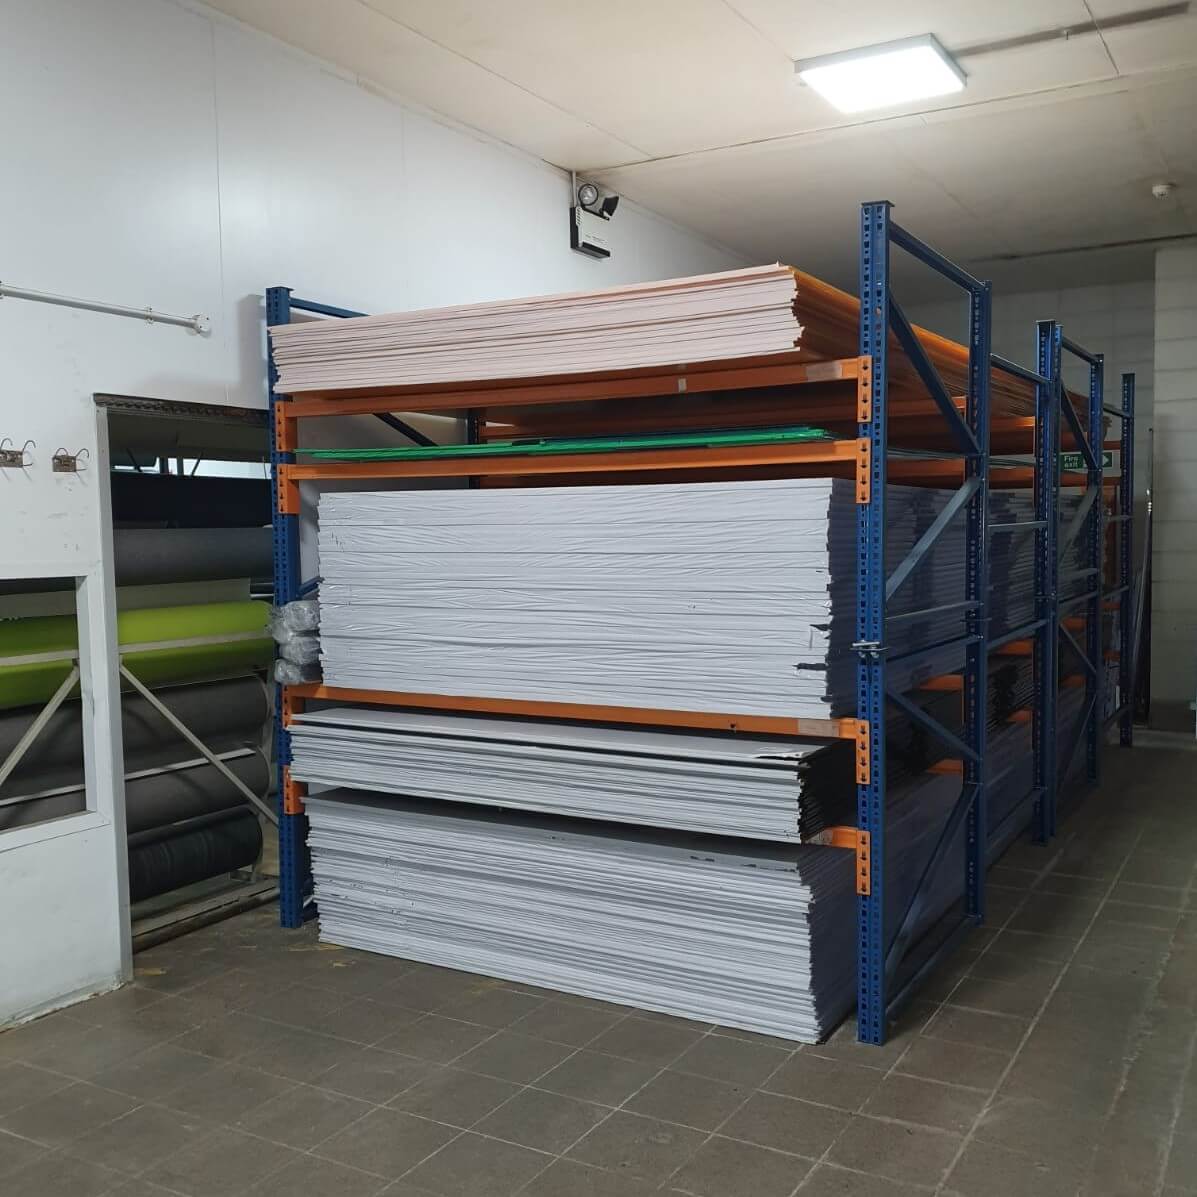 6mm Orange Polycarbonate Roofing Sheet (4m+ Length - Collection)